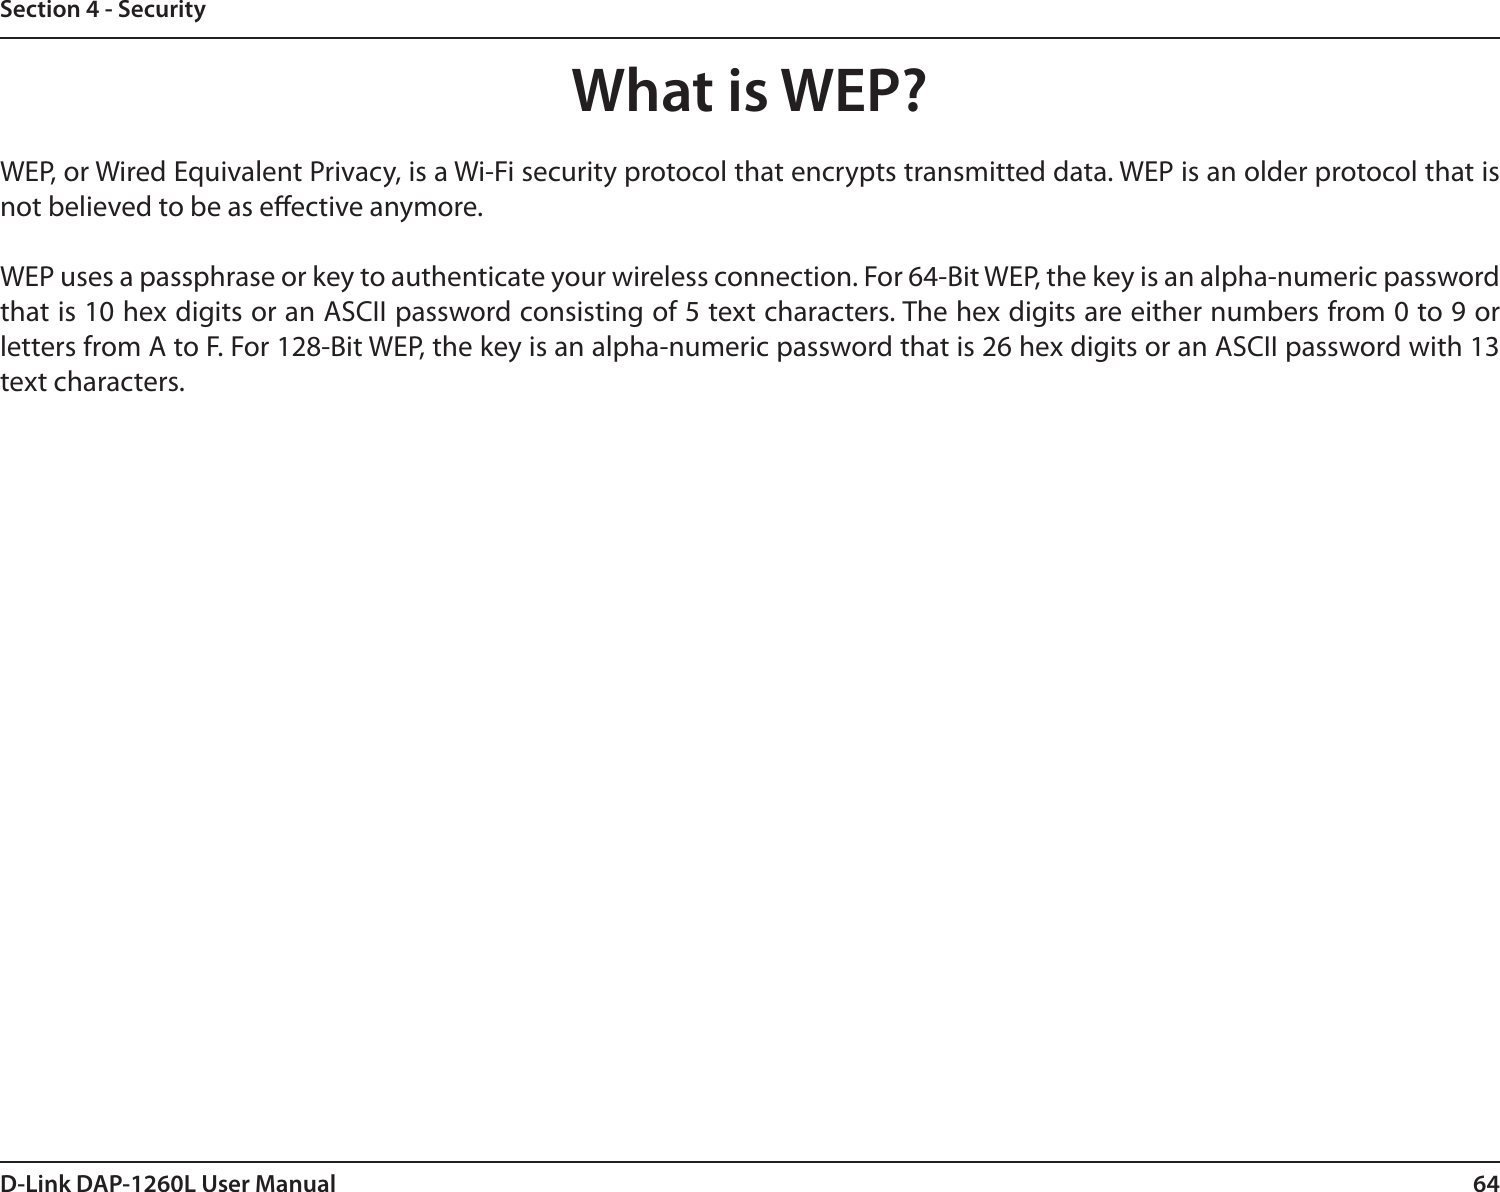 64D-Link DAP-1260L User ManualSection 4 - SecurityWhat is WEP?WEP, or Wired Equivalent Privacy, is a Wi-Fi security protocol that encrypts transmitted data. WEP is an older protocol that is not believed to be as eective anymore. WEP uses a passphrase or key to authenticate your wireless connection. For 64-Bit WEP, the key is an alpha-numeric password that is 10 hex digits or an ASCII password consisting of 5 text characters. The hex digits are either numbers from 0 to 9 or letters from A to F. For 128-Bit WEP, the key is an alpha-numeric password that is 26 hex digits or an ASCII password with 13 text characters. 